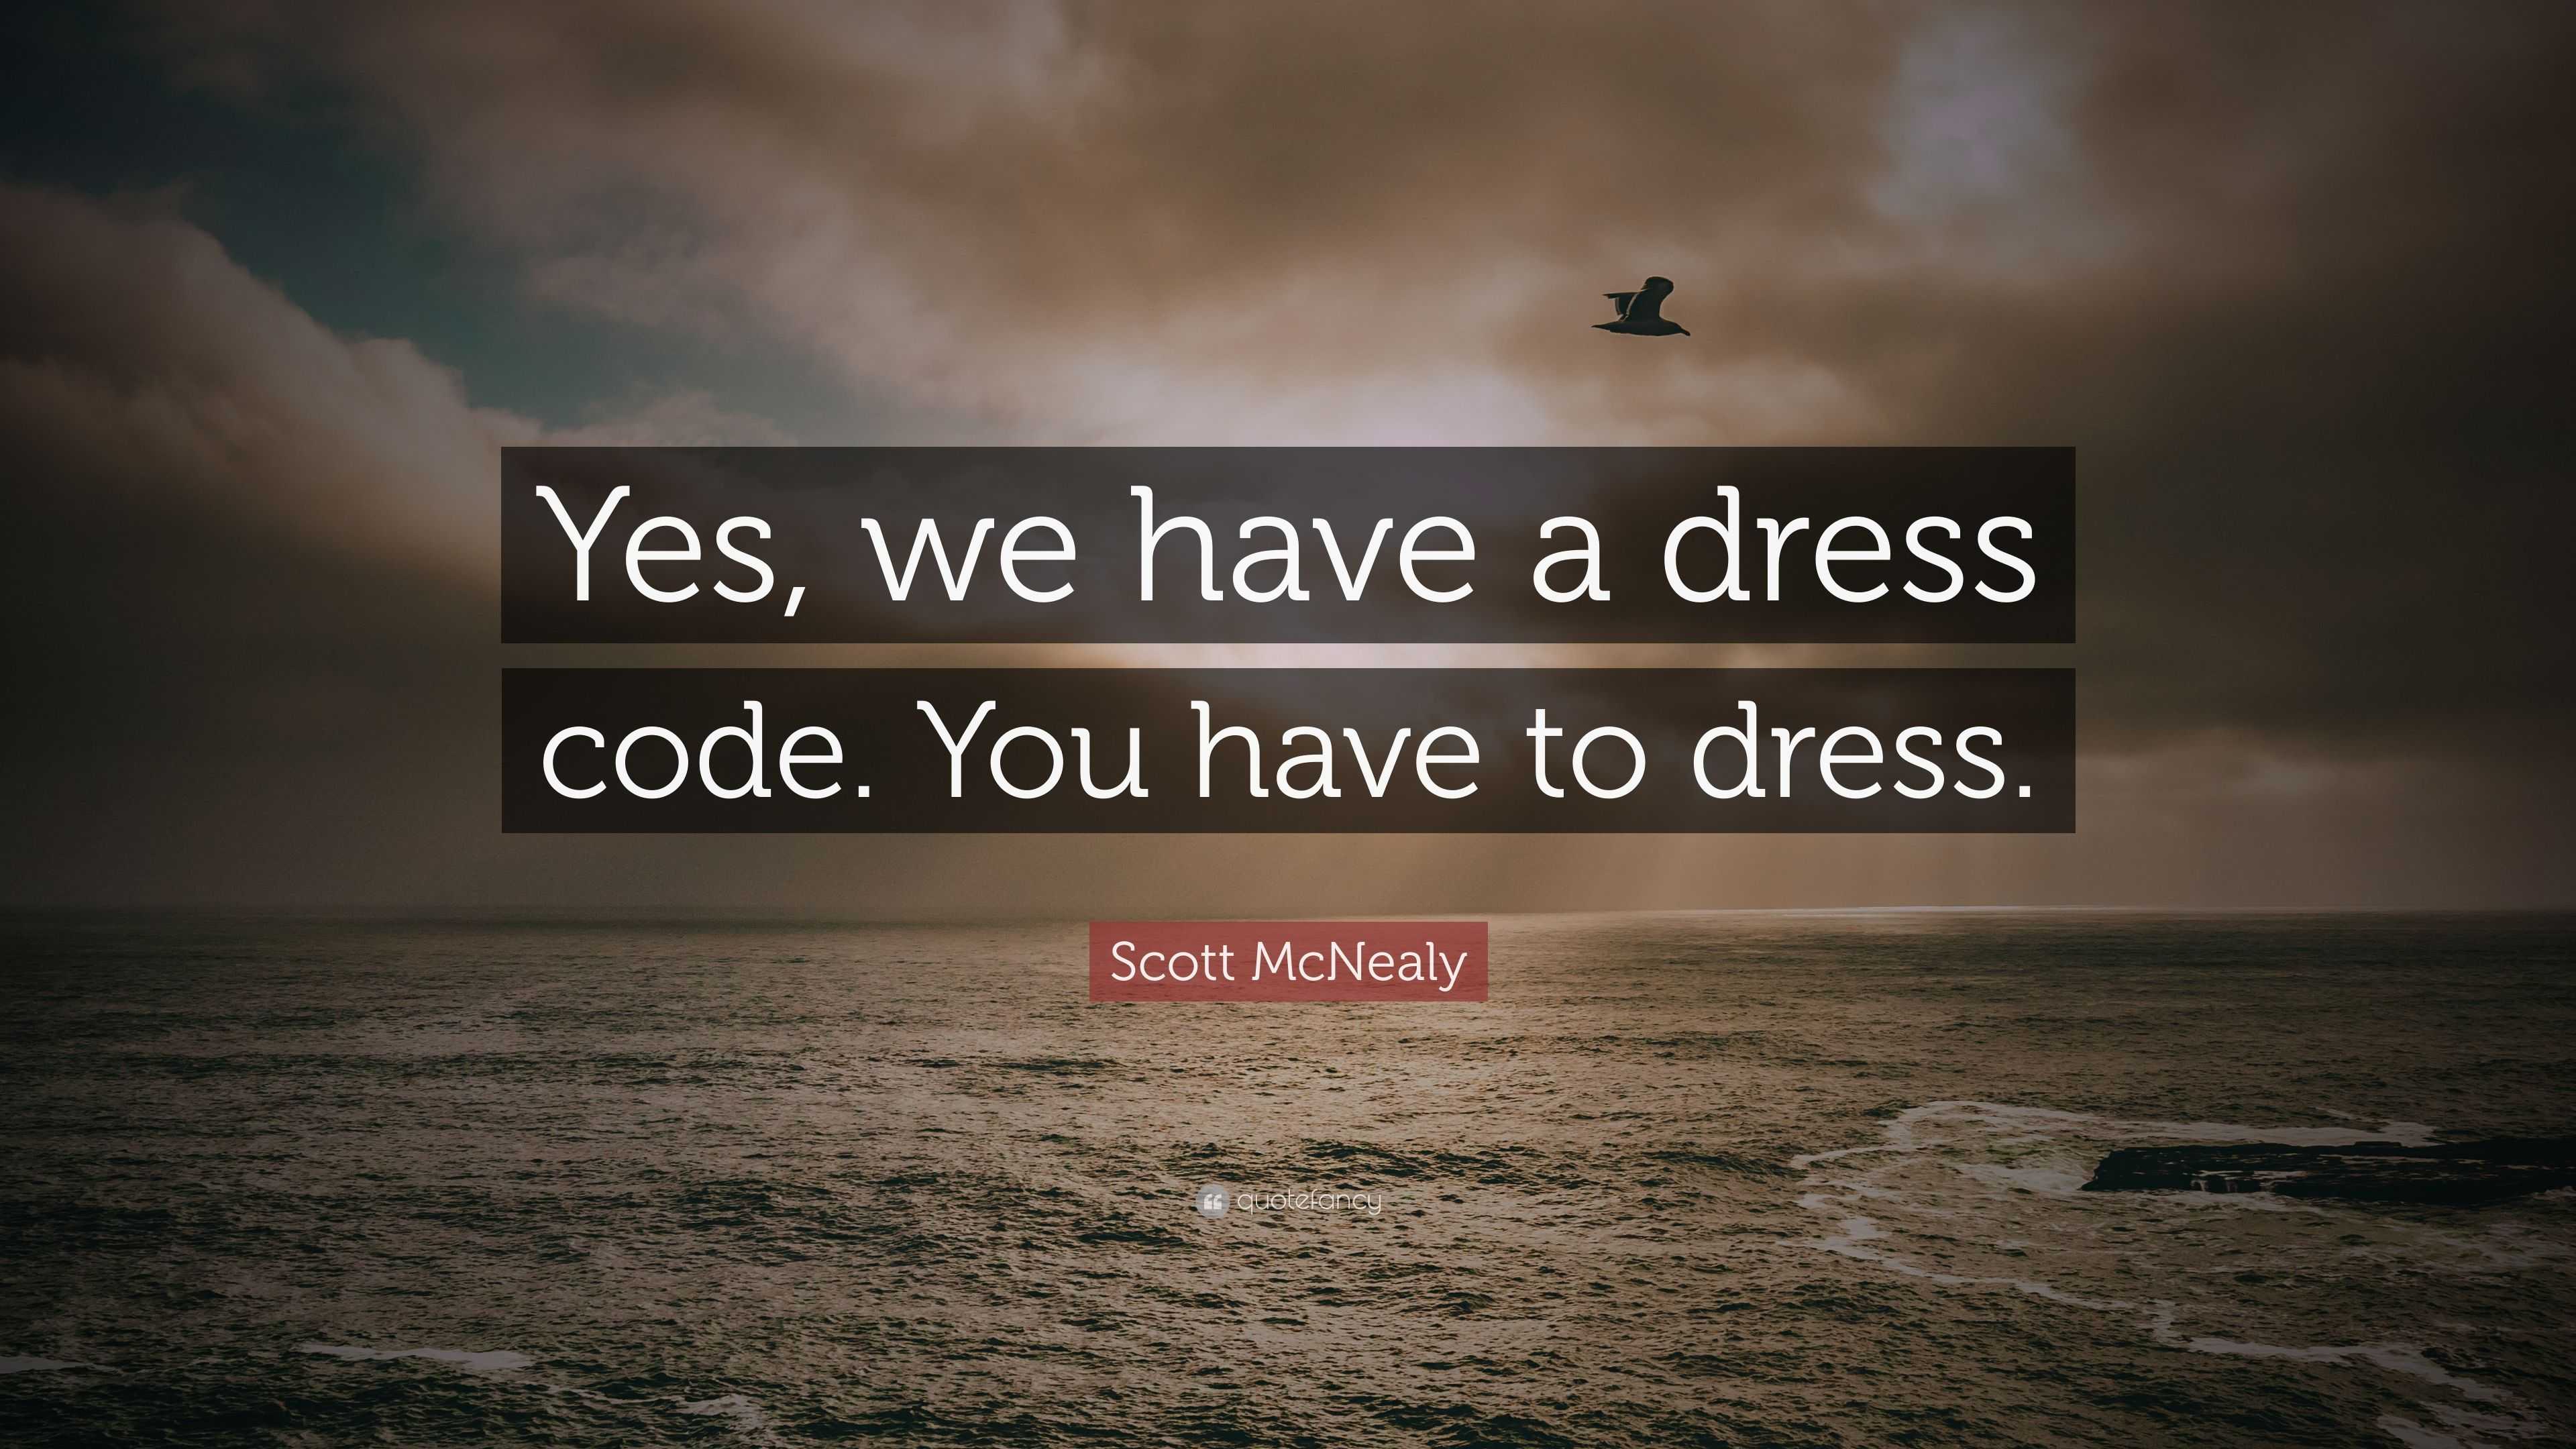 Dress Code | Funny dress, Coding quotes, Home quotes and sayings